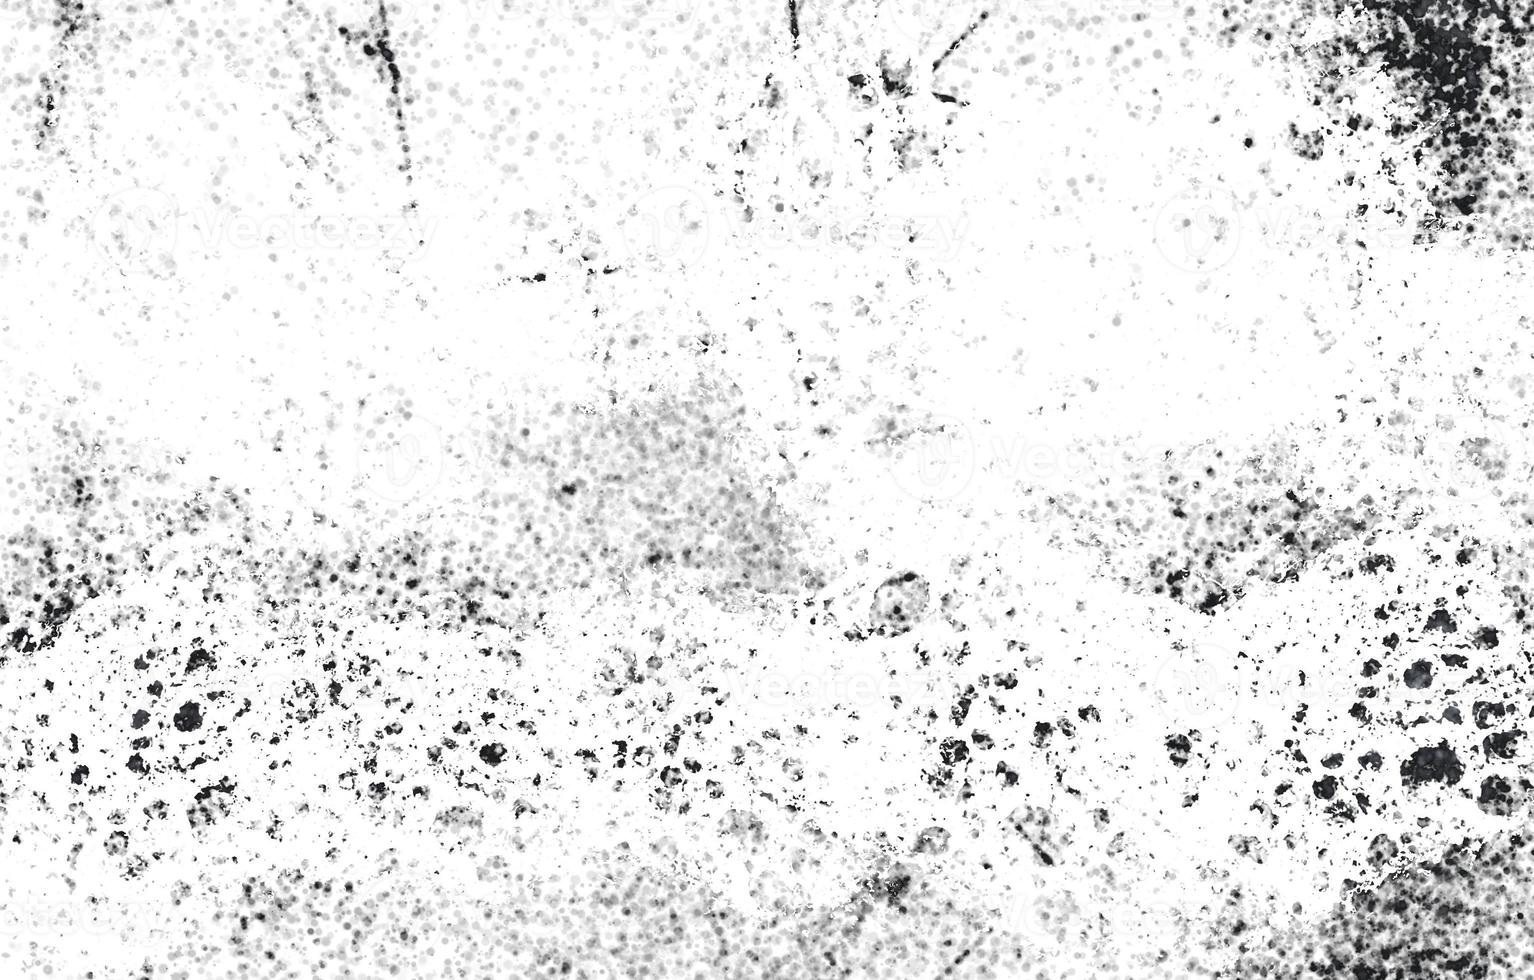 Grunge black and white texture.Overlay illustration over any design to create grungy vintage effect and depth. For posters, banners, retro and urban designs. photo